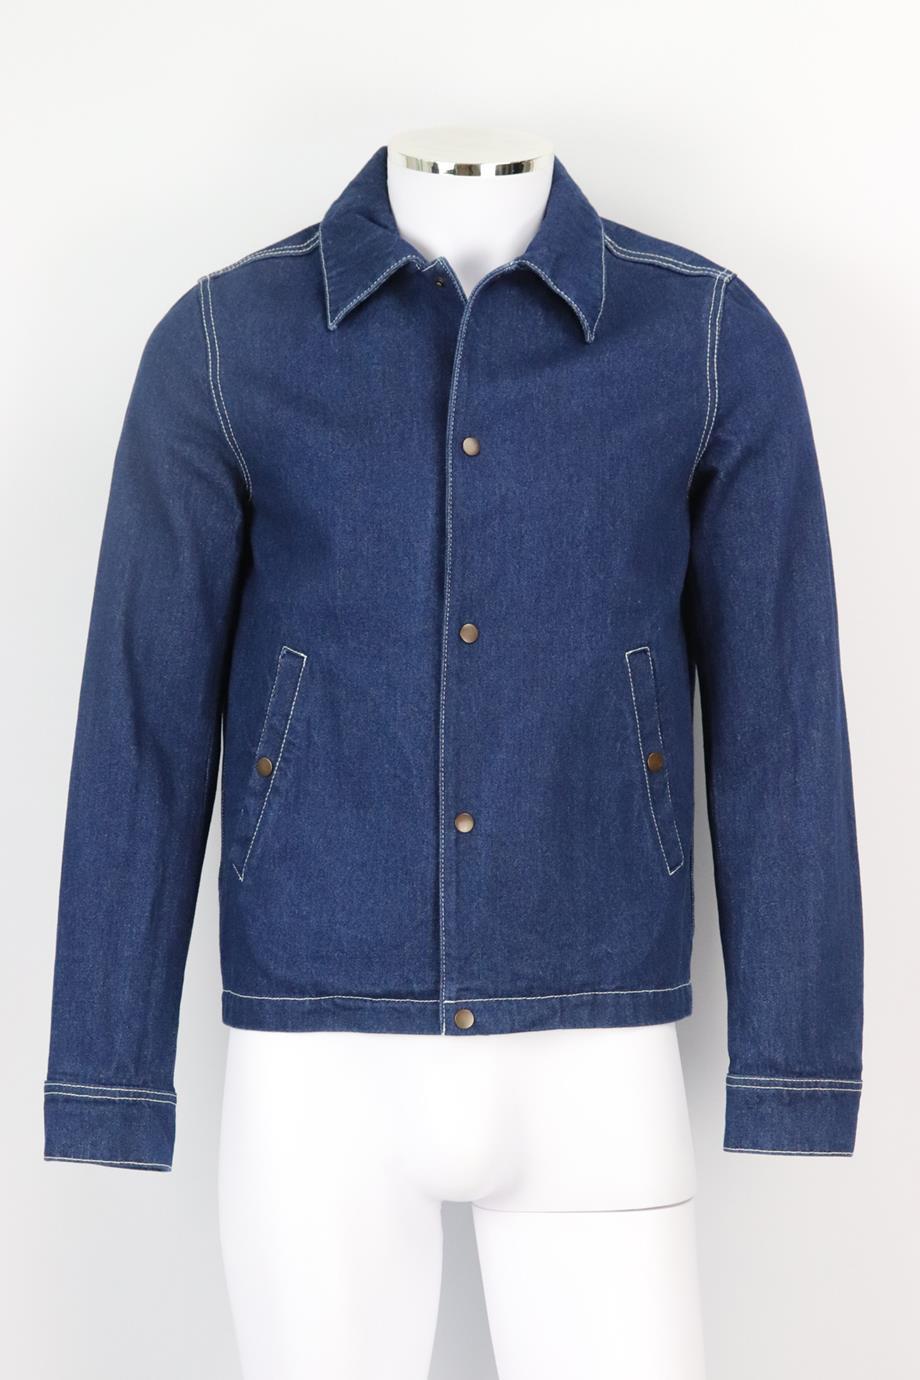 AMI Paris men's denim jacket. Blue. Long sleeve, crewneck. Button fastening at front. 100% Cotton. Size: XSmall (IT 44, EU 44, UK/US Chest 34). Shoulder to shoulder: 16 in. Bust: 40 in. Waist: 39 in. Hips: 37 in. Length: 25 in. Very good condition -